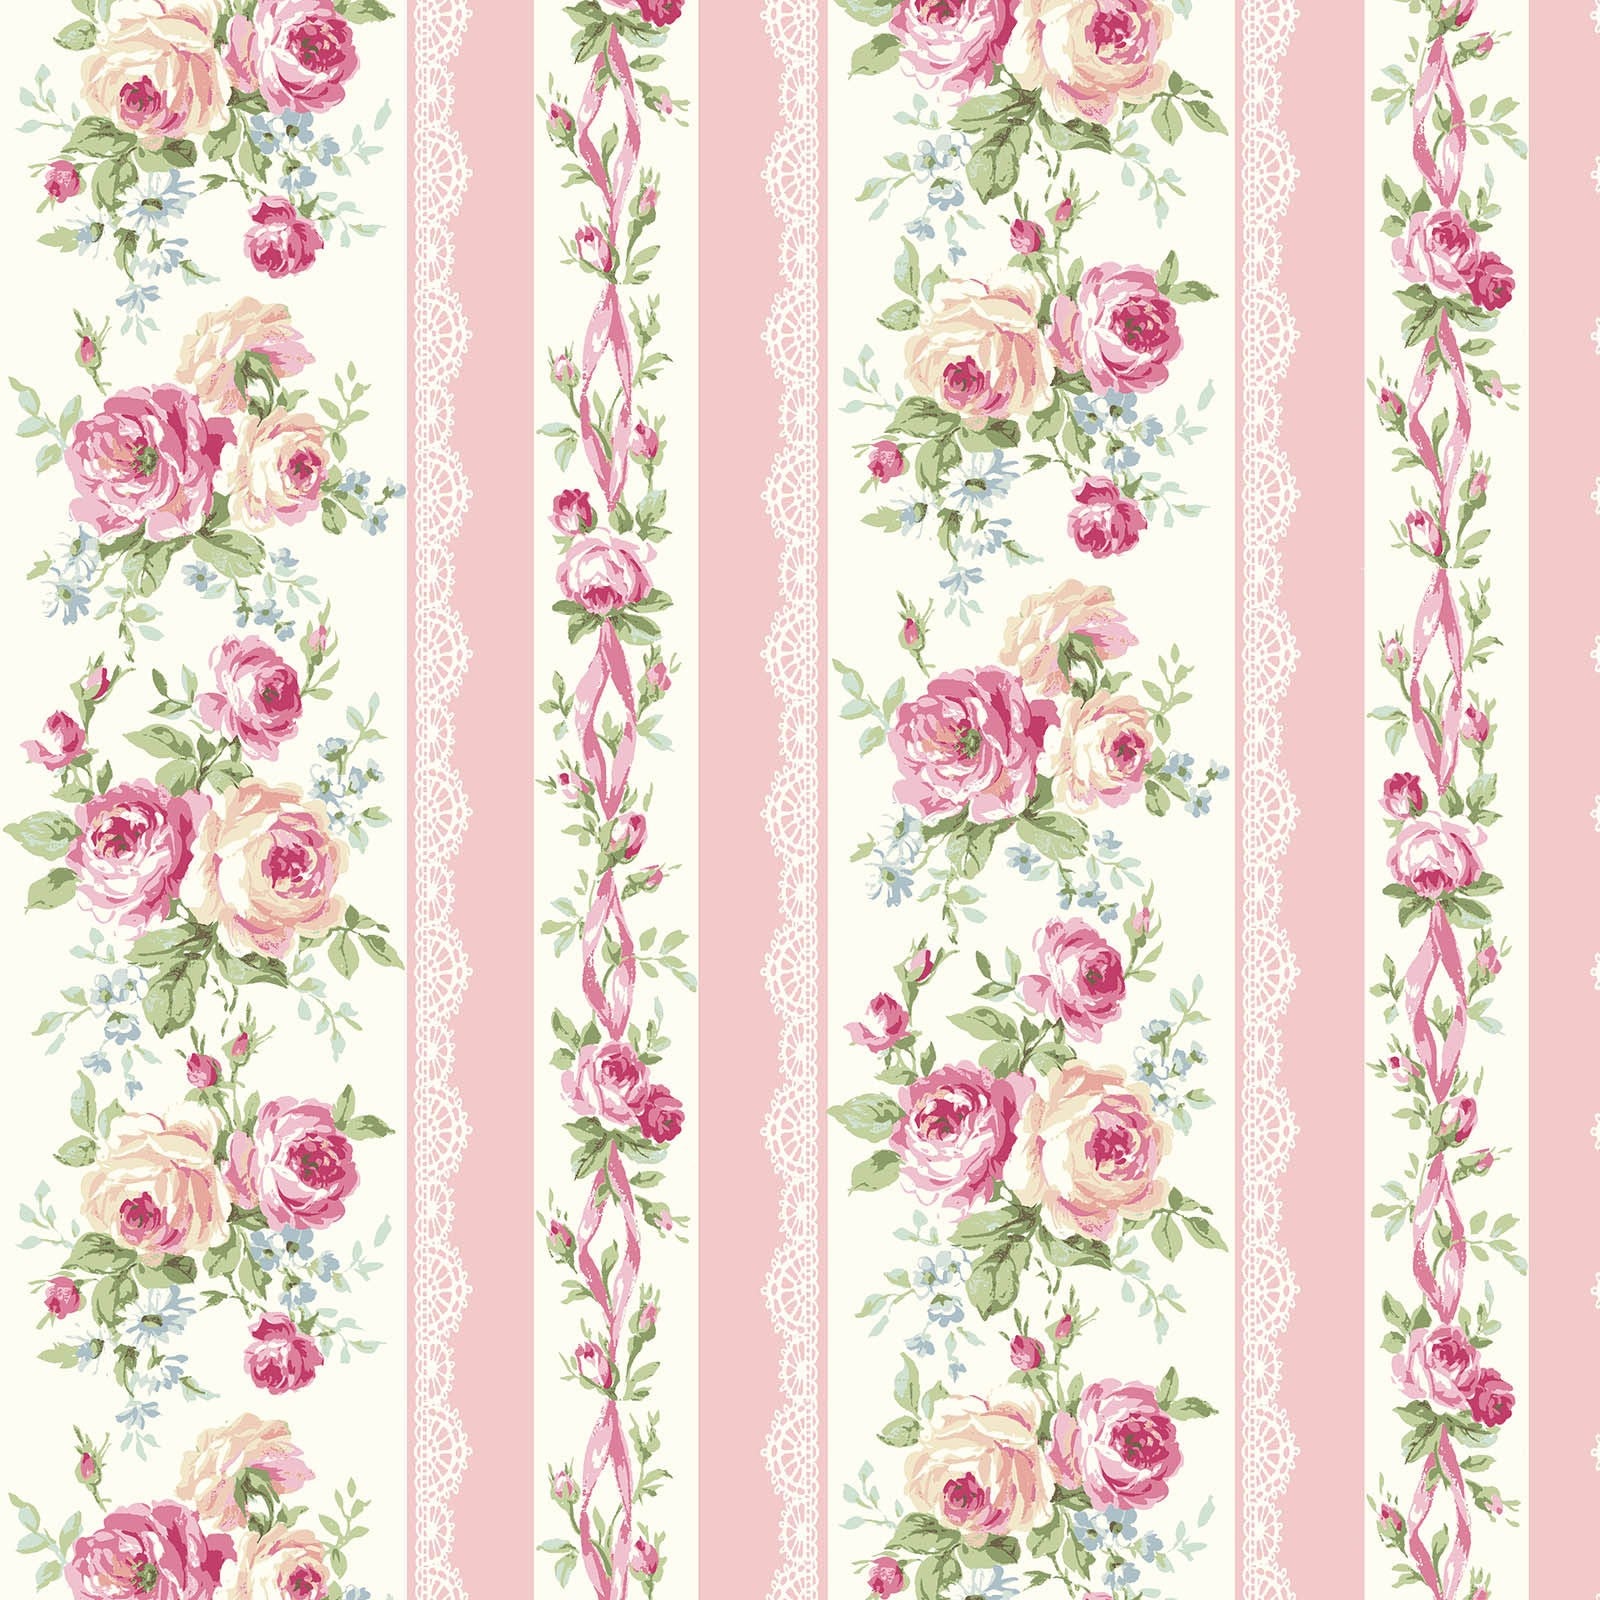 Rose Waltz RuRu Bouquet cotton fabric by Quilt Gate Ru2450-12B Roses and Ribbons on Pink